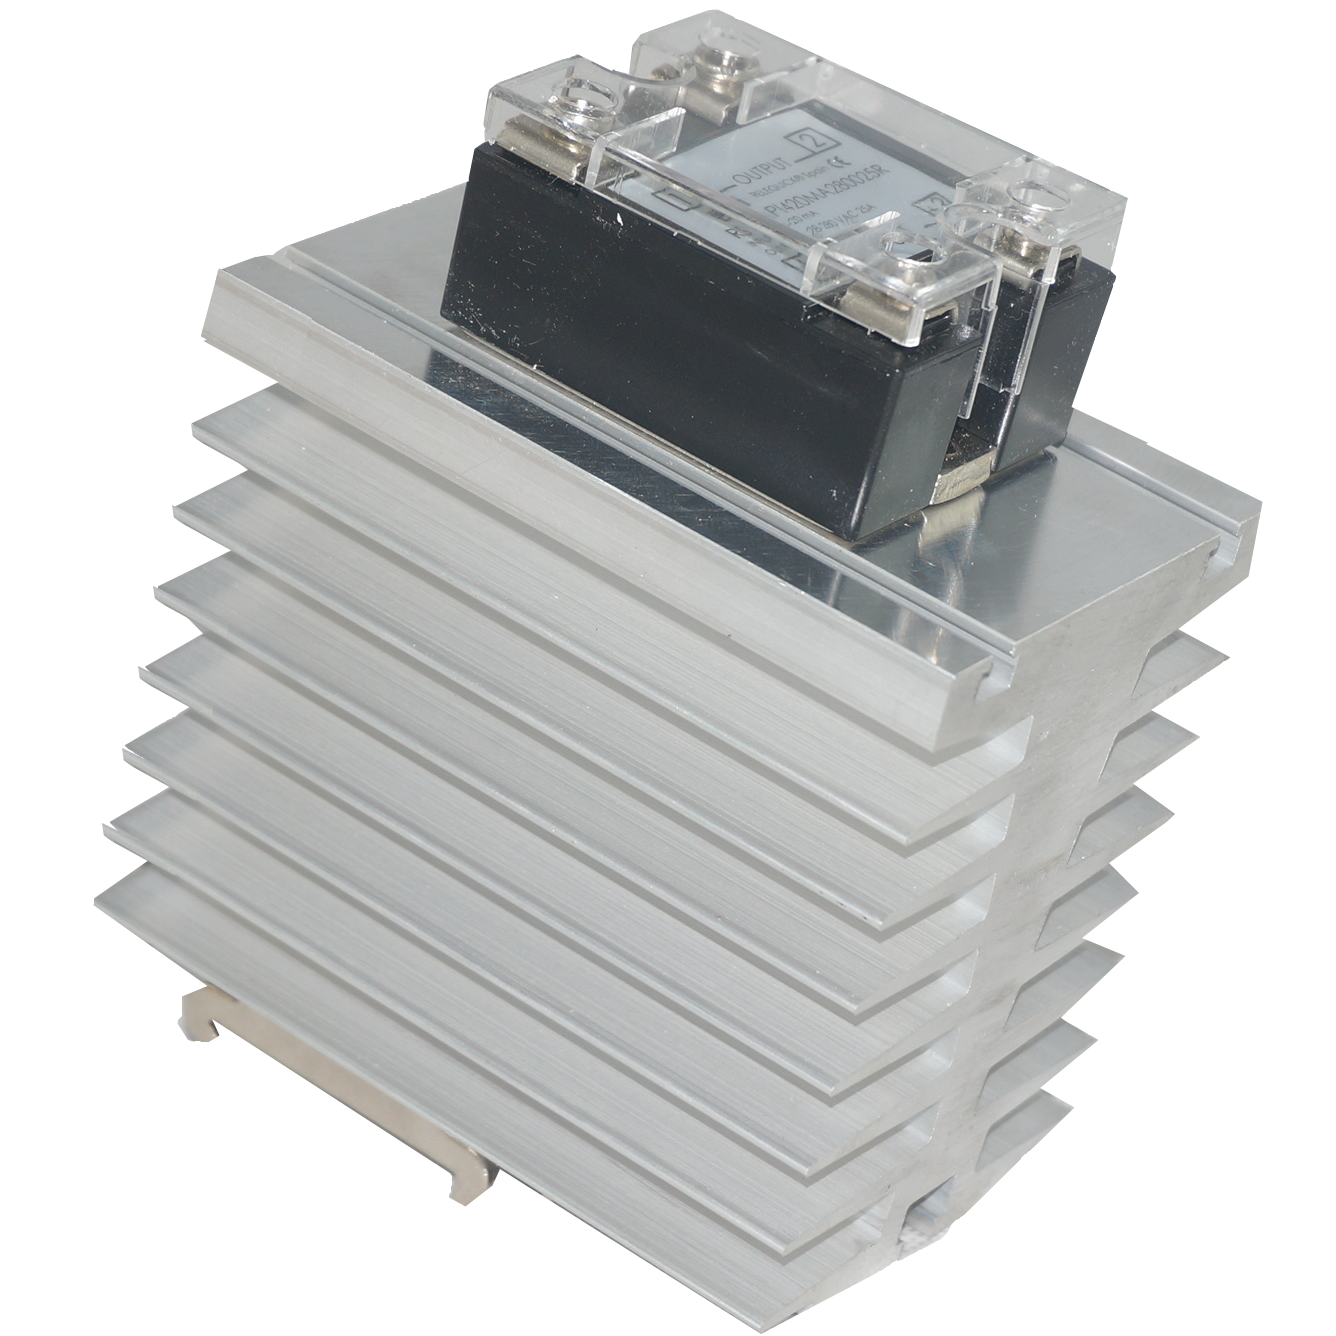 GFIN/100M-DR + RS1API420MA280060R, Din Rail Mount Single Phase Proportional Phase Controller with Heatsink, 4-20mA Input, 240V, 50 Amps @ 40 Deg C